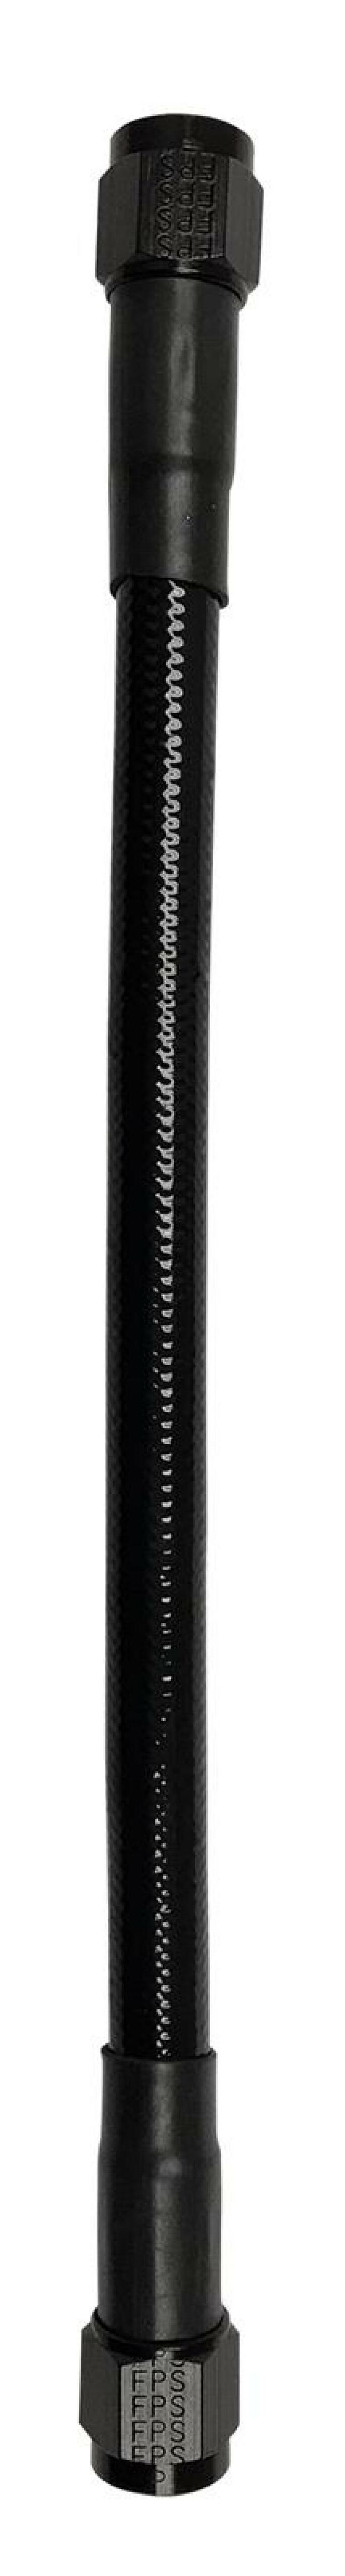 Fragola -10AN Ext Black PTFE Hose Assembly Straight x Straight 24in - 6029-1-1-24BL